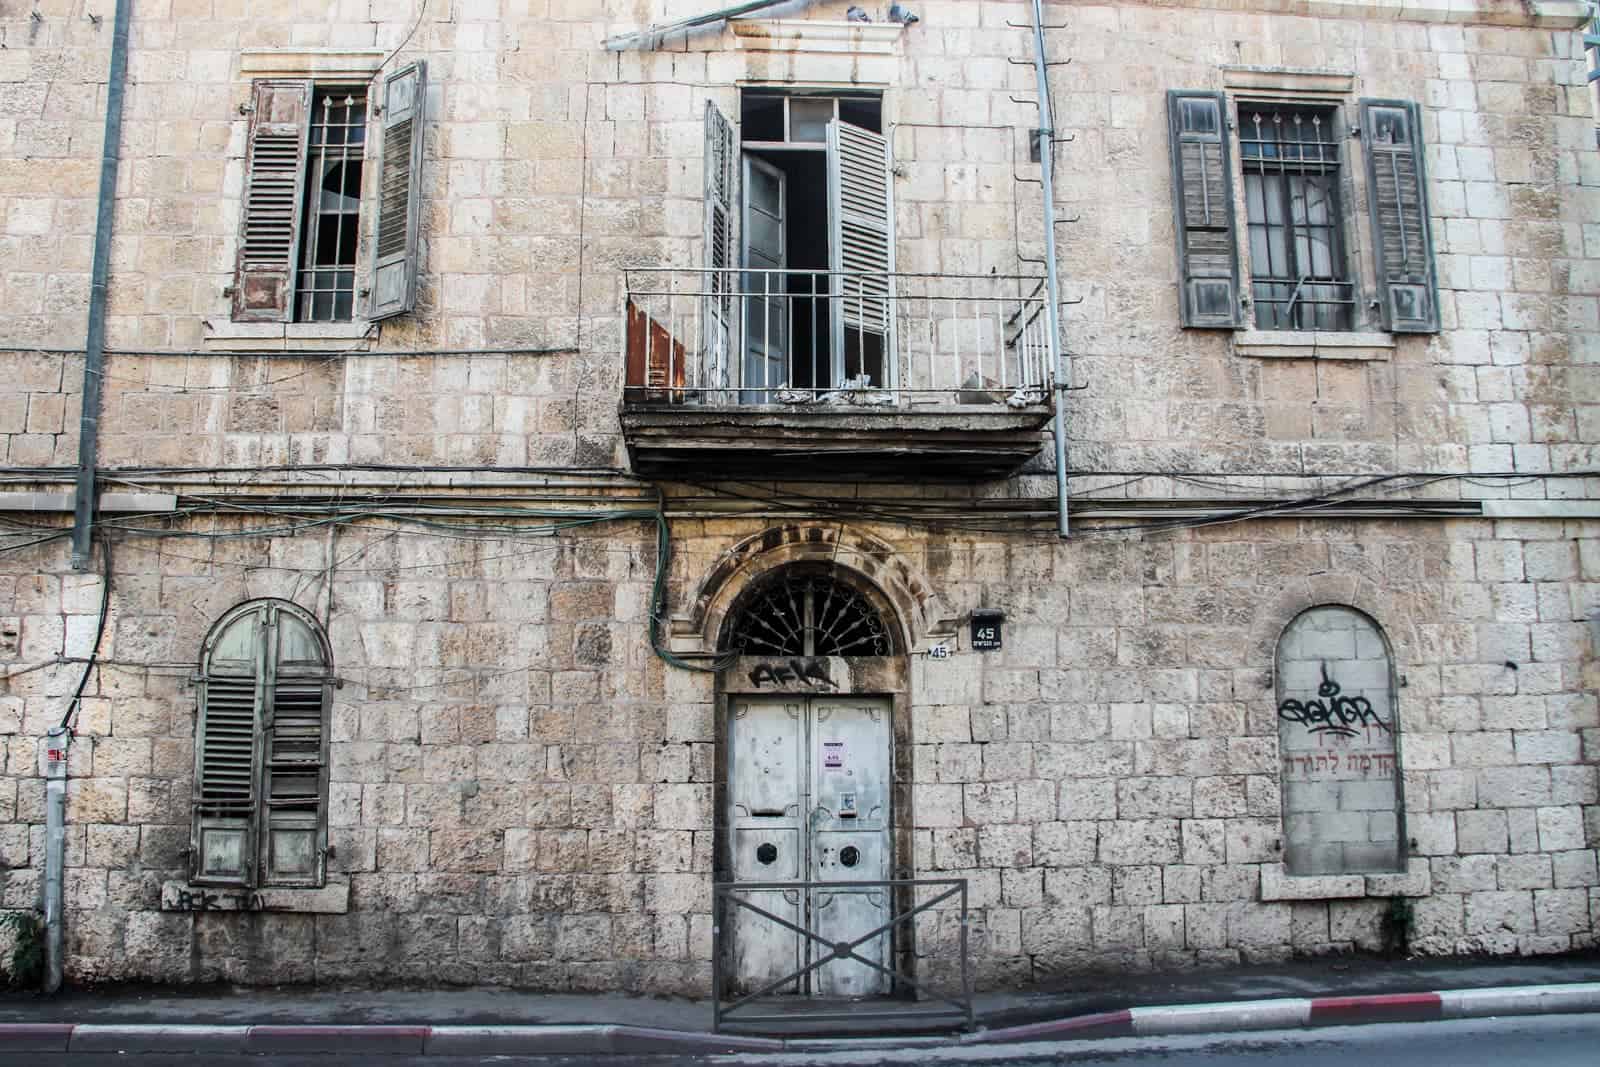 A worn Jerusalem stone building, with five windows (the bottom right one bricked up), and a grubby white metal door. 